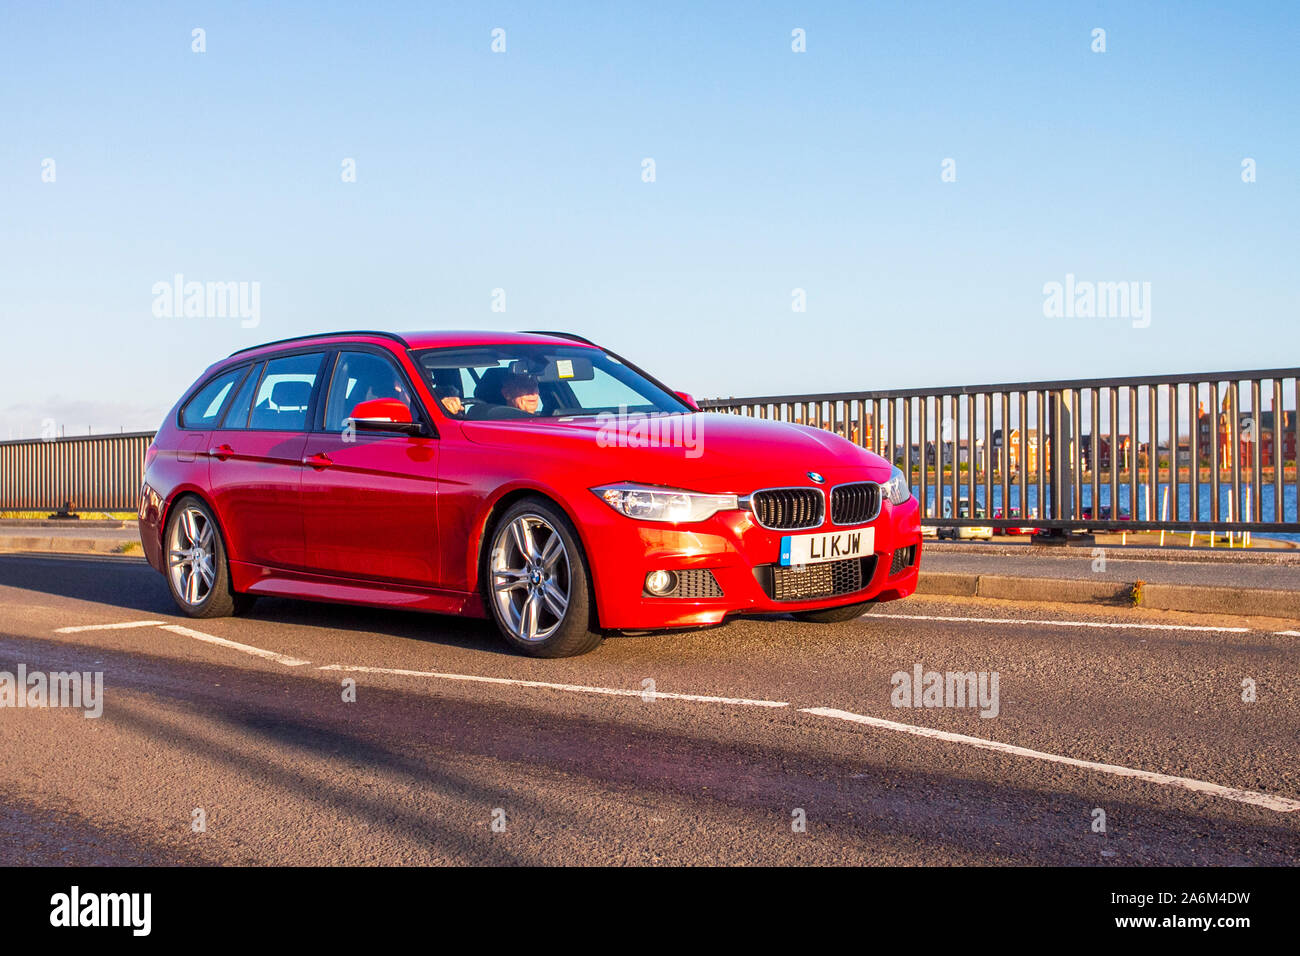 BMW 320d Touring M Sport (F31) front Stock Photo - Alamy